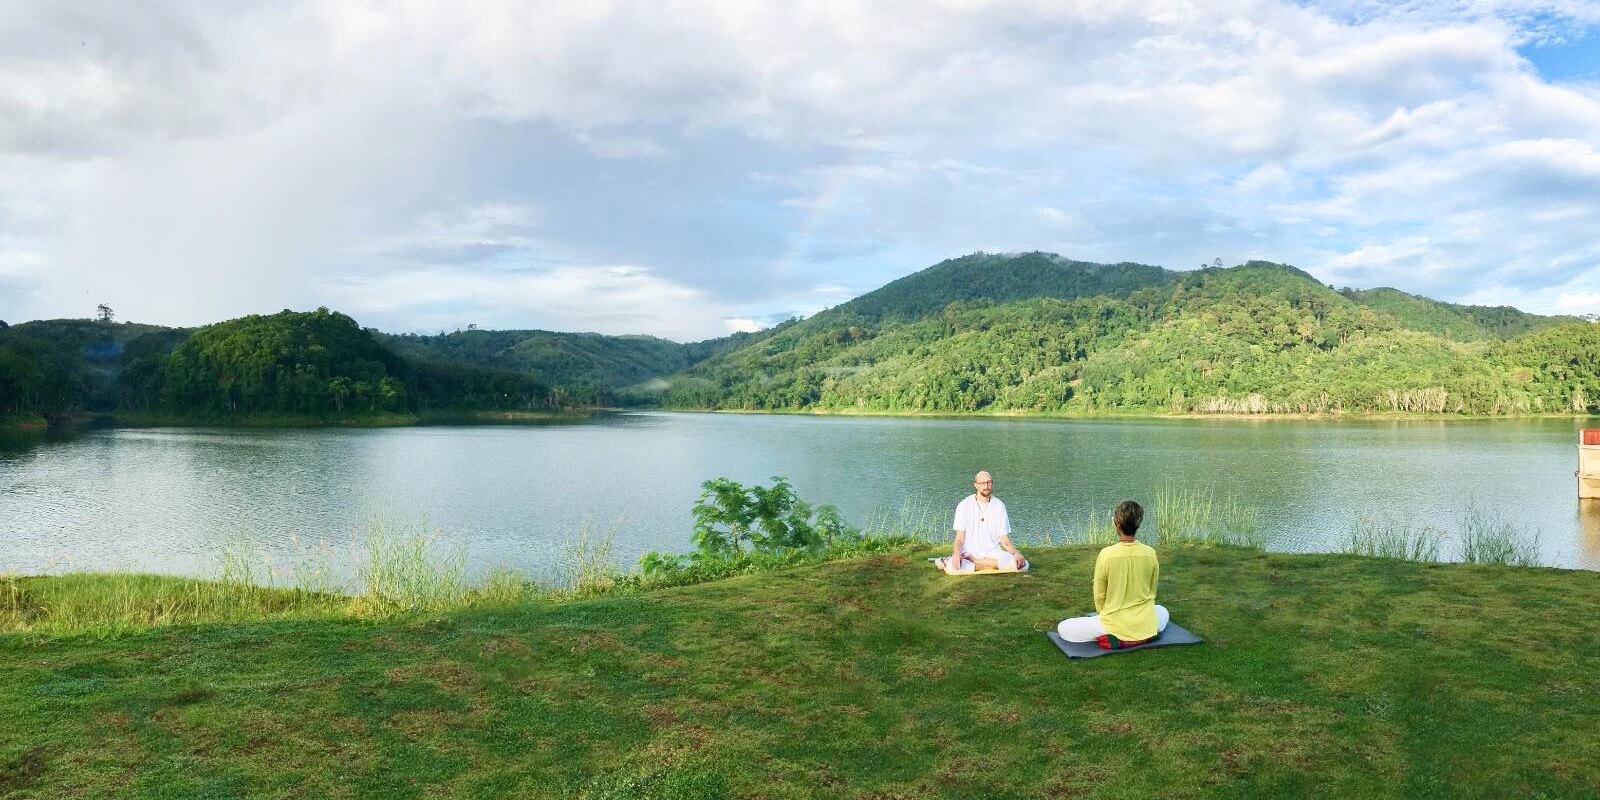 Tobi Warzinek provides personal guidance to a woman. They meditate together in nature at a lake.